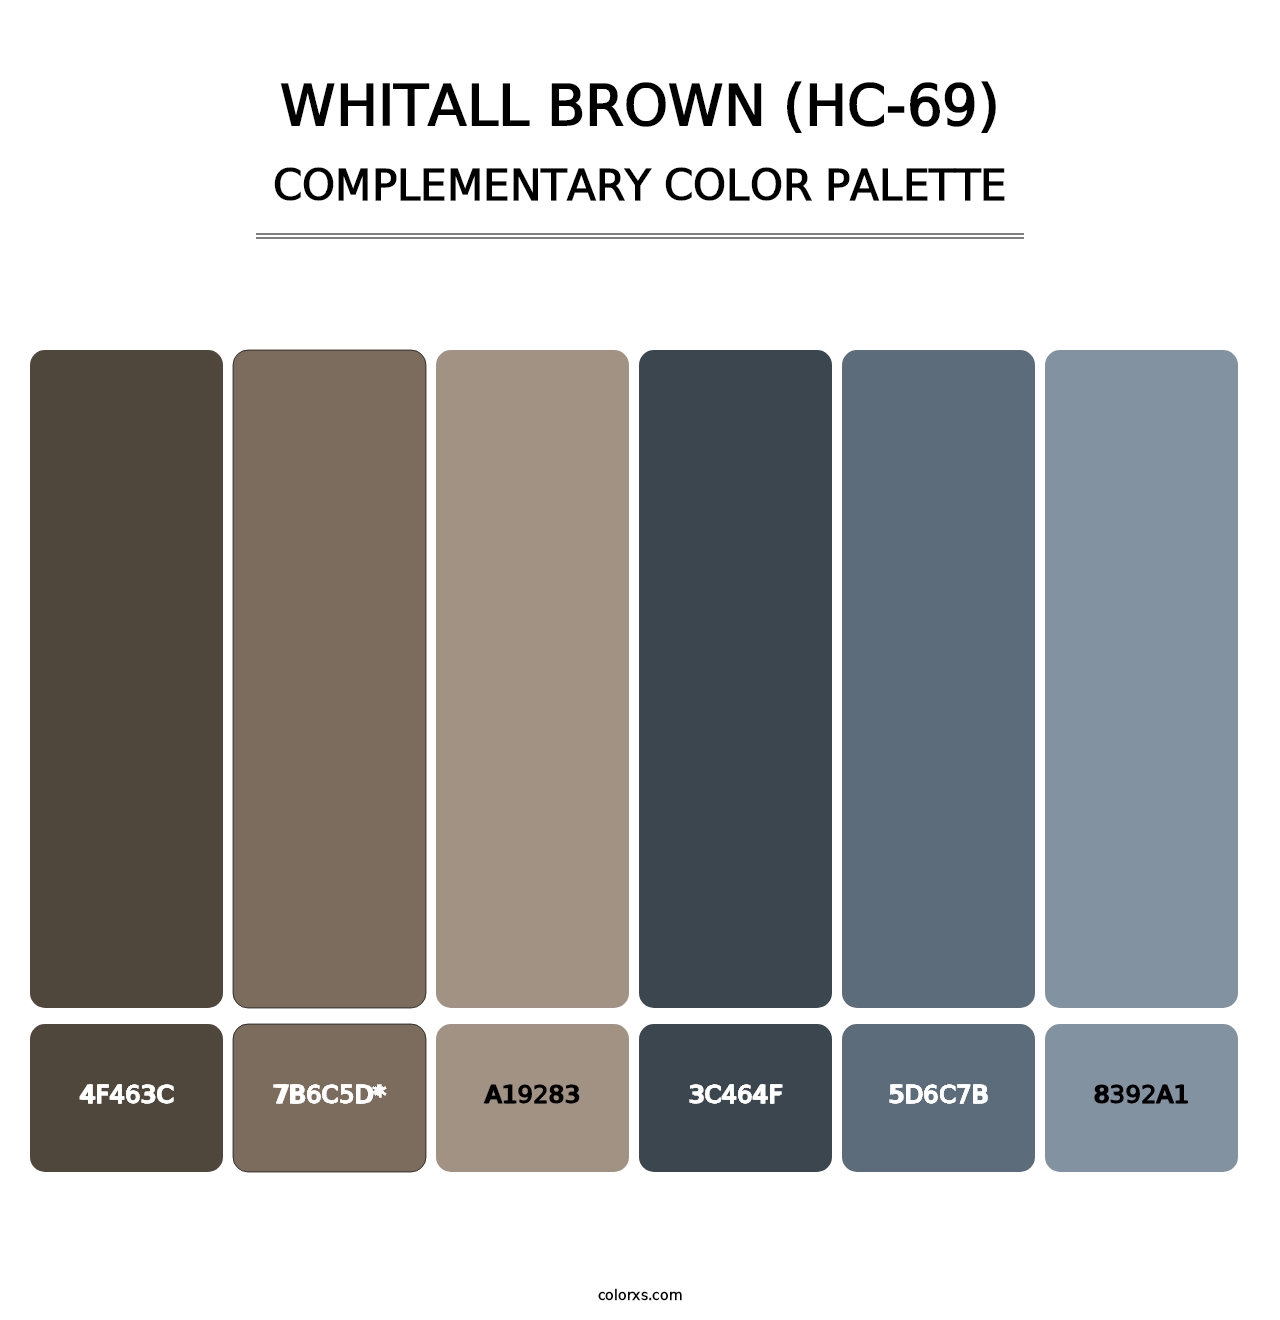 Whitall Brown (HC-69) - Complementary Color Palette